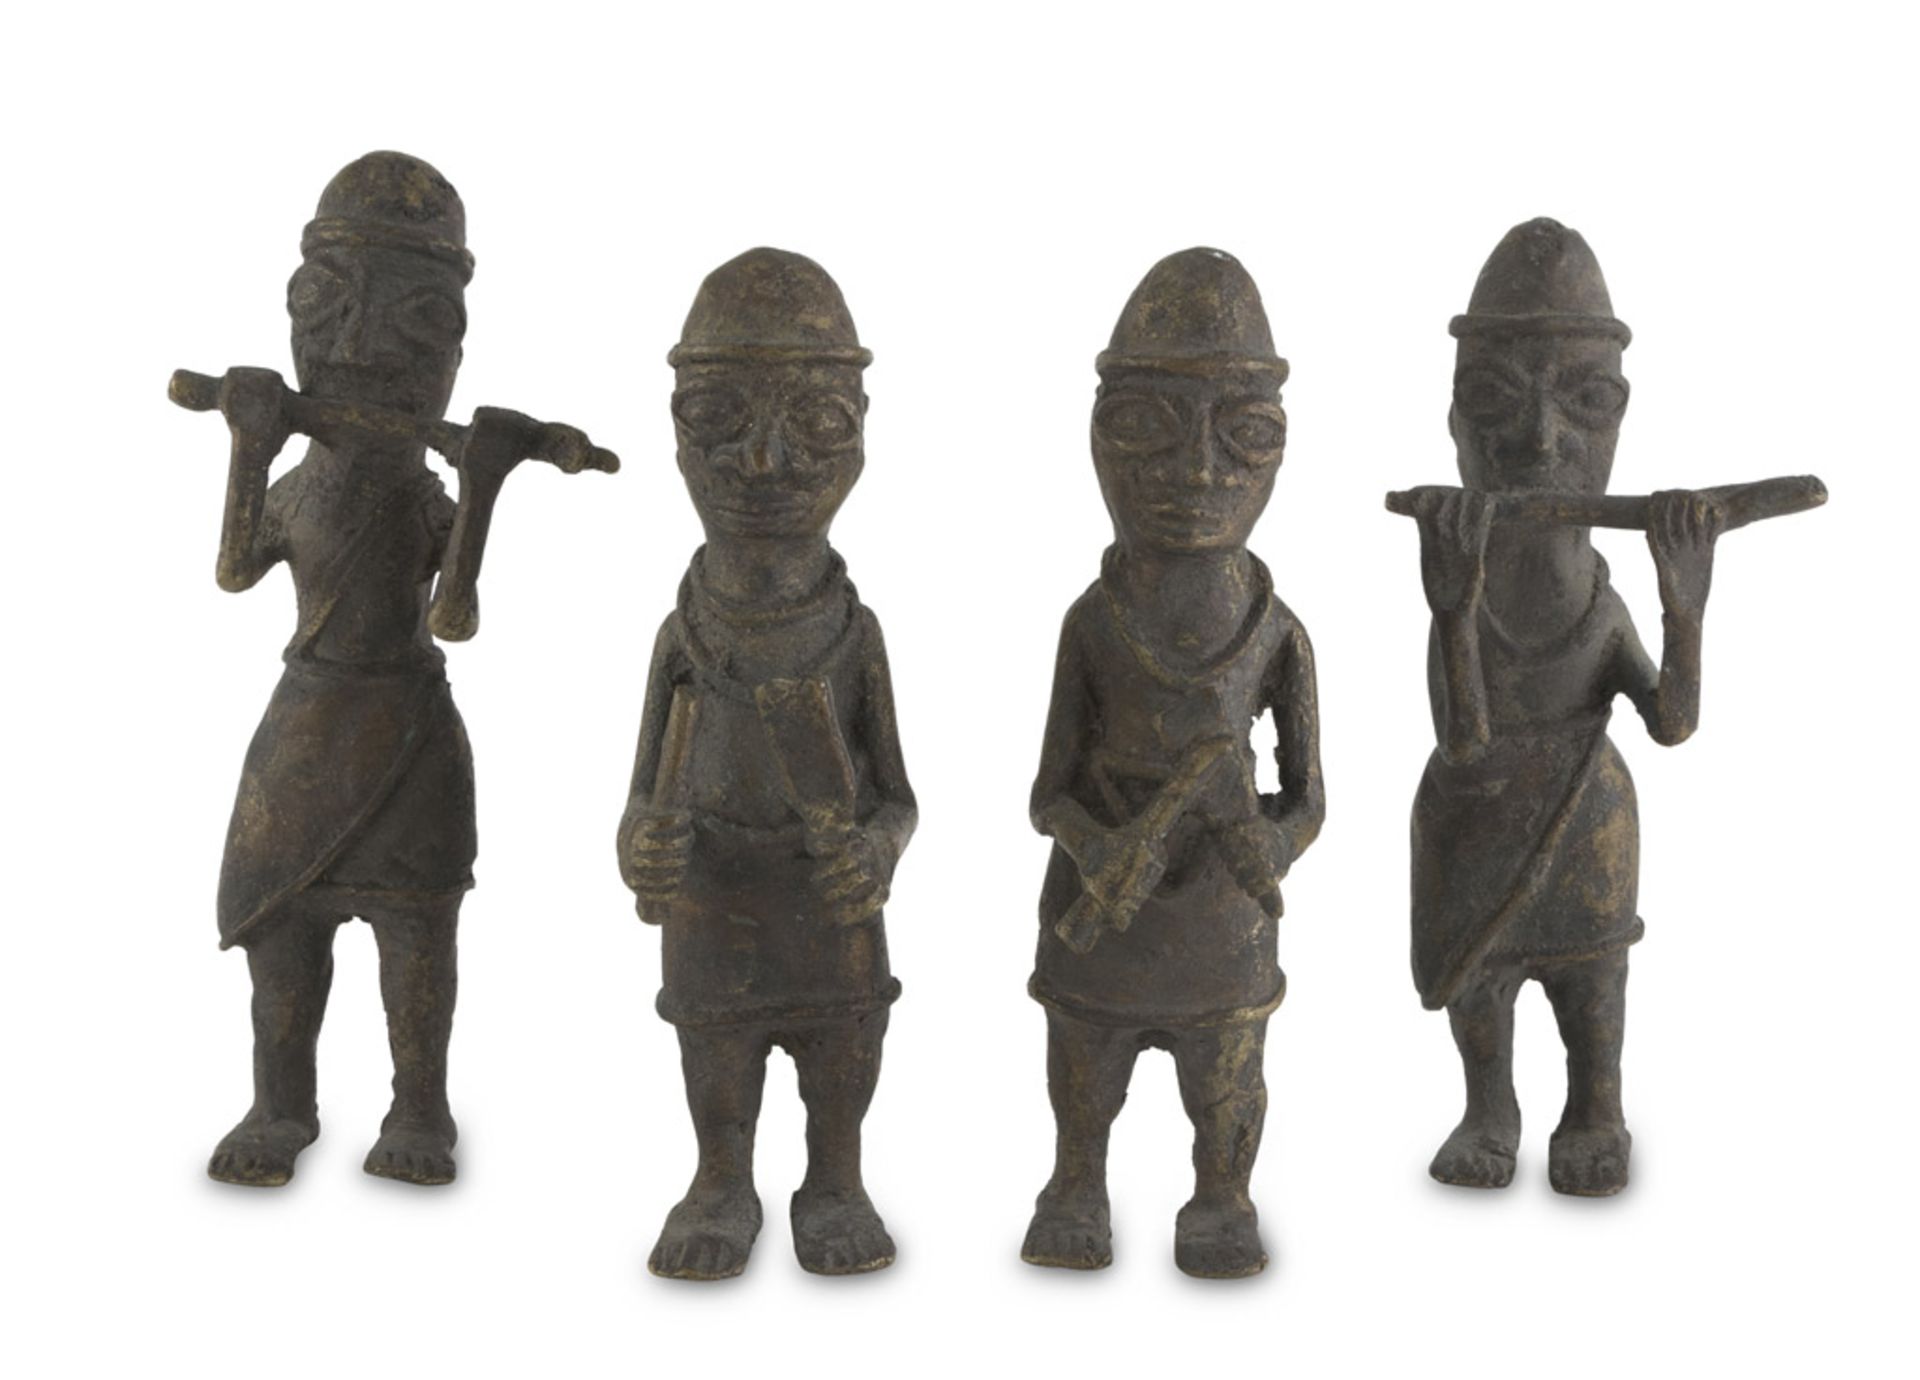 FOUR BRONZE SCULPTURES, IFO CULTURE, NIGERIA EARLY 20TH CENTURY representing musicians in erect